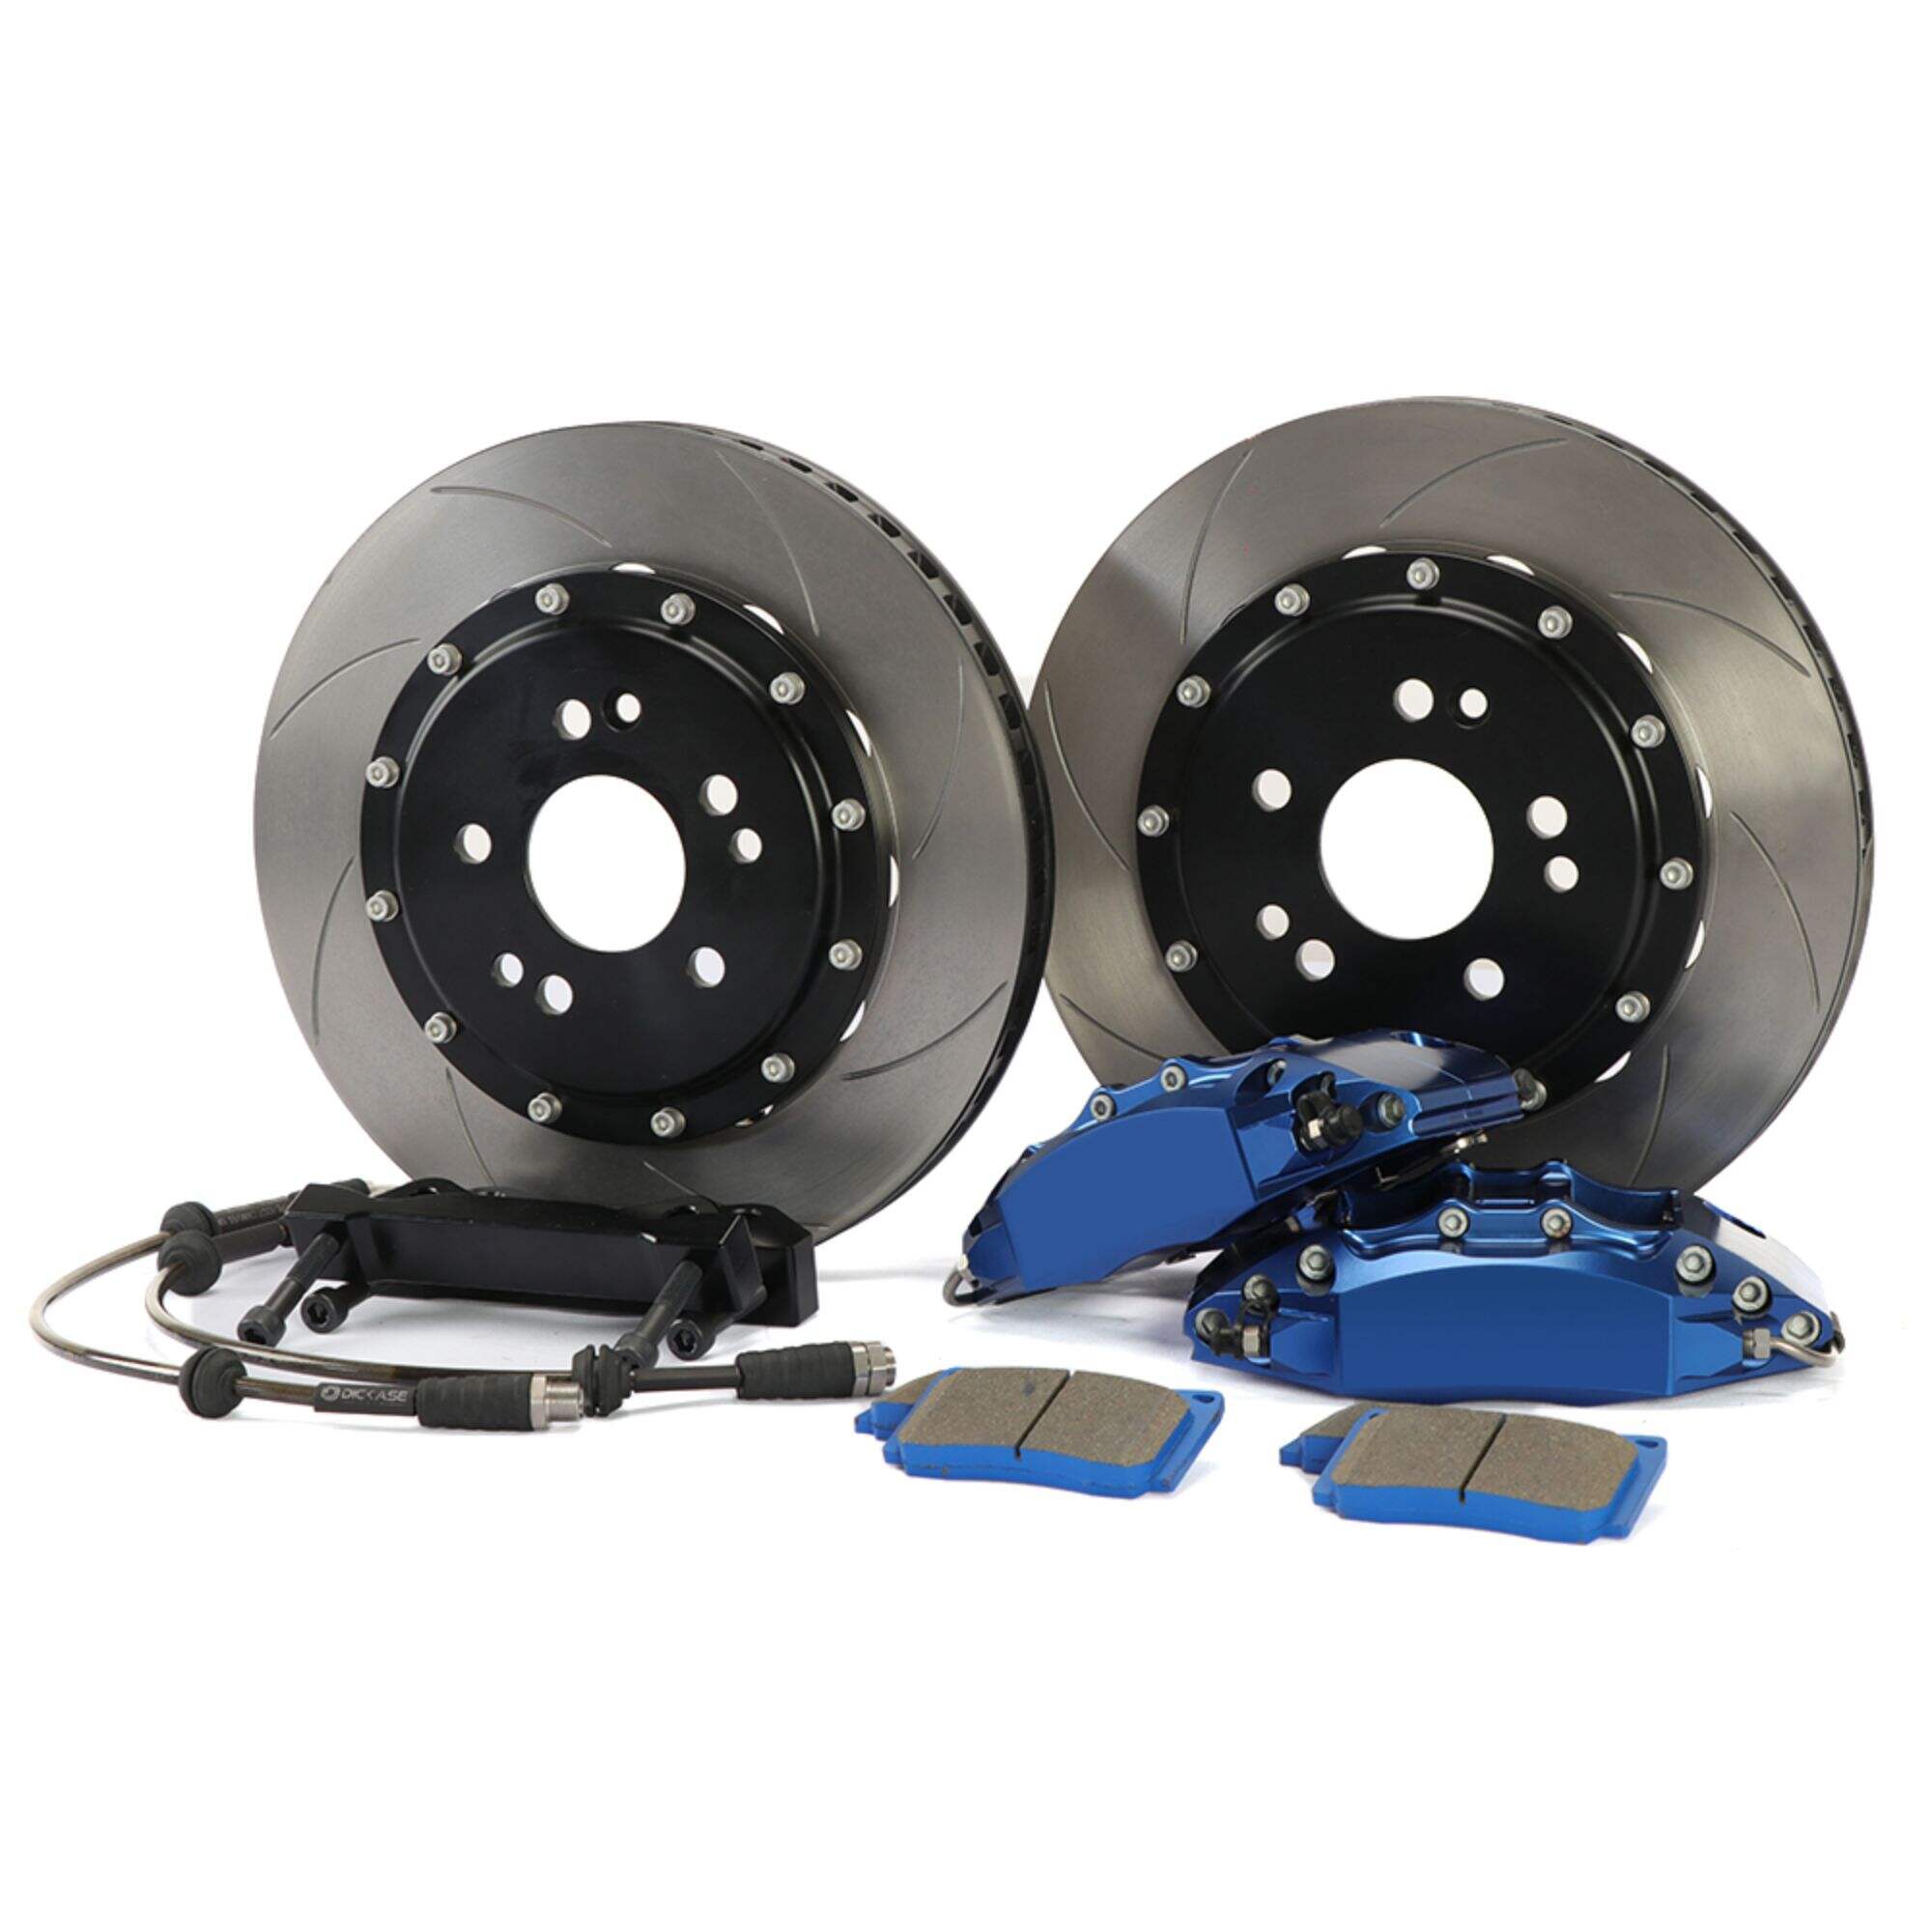 oem auto brake factory accessories brake kit brake systems for VolksWagen id3 id4 id6